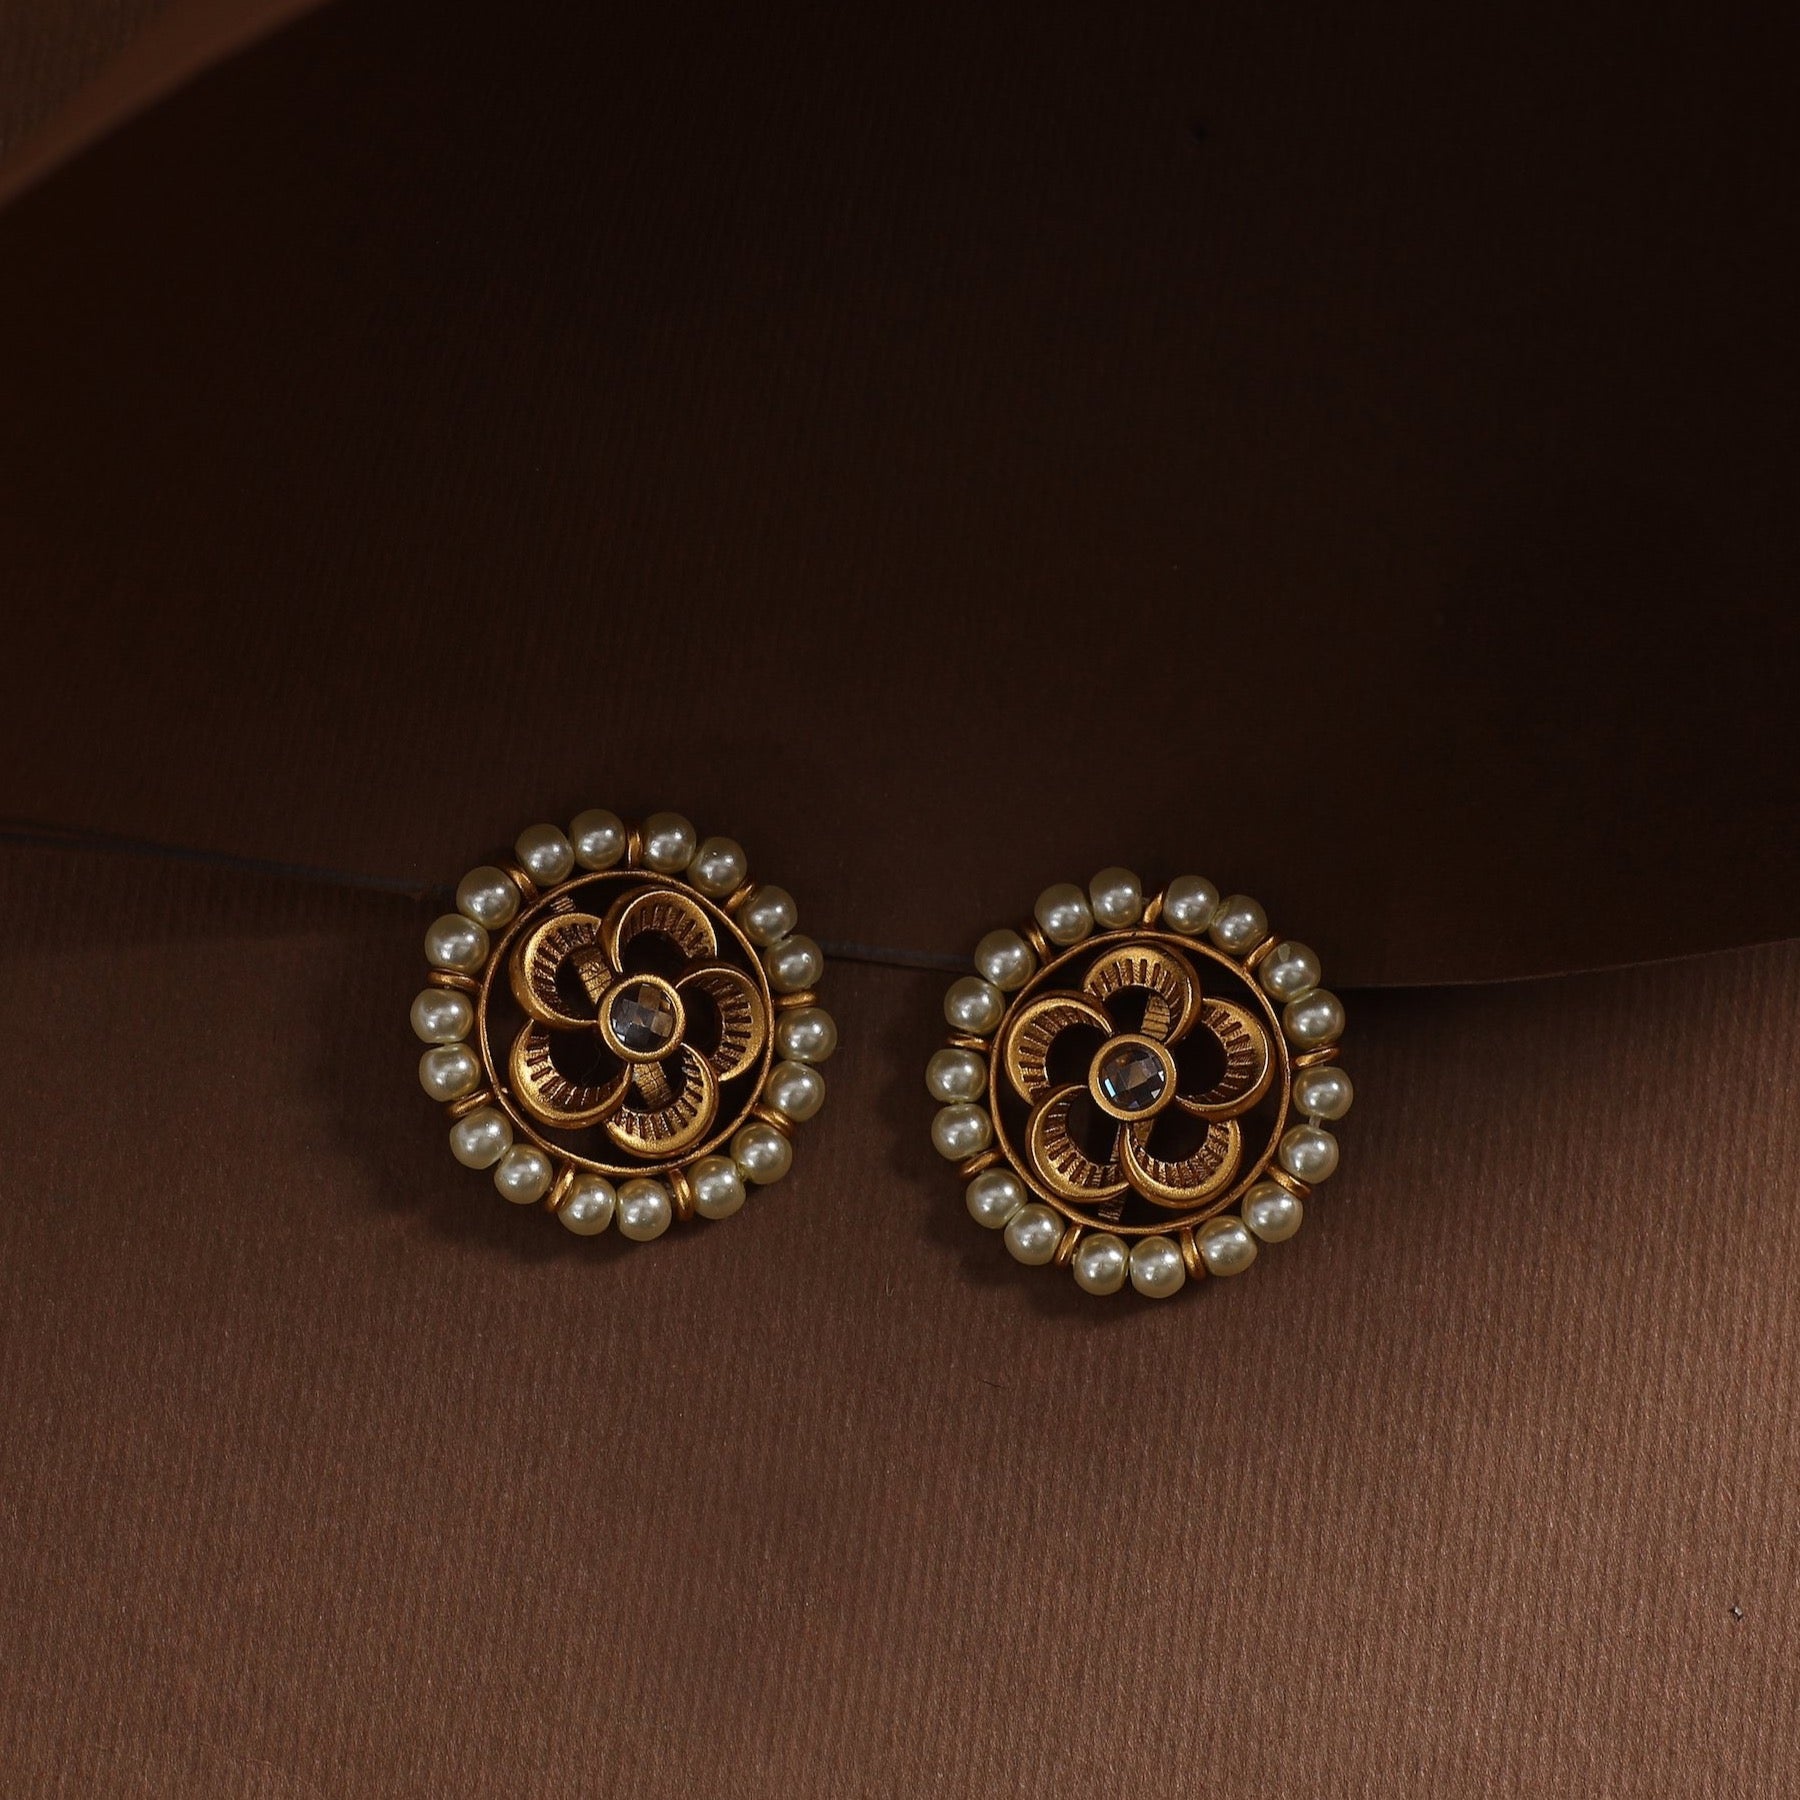 Goddess Lakshmi Jhumka Earrings: Antique Gold Exclusive Jewelry Designs -  Real Image Collection J26341